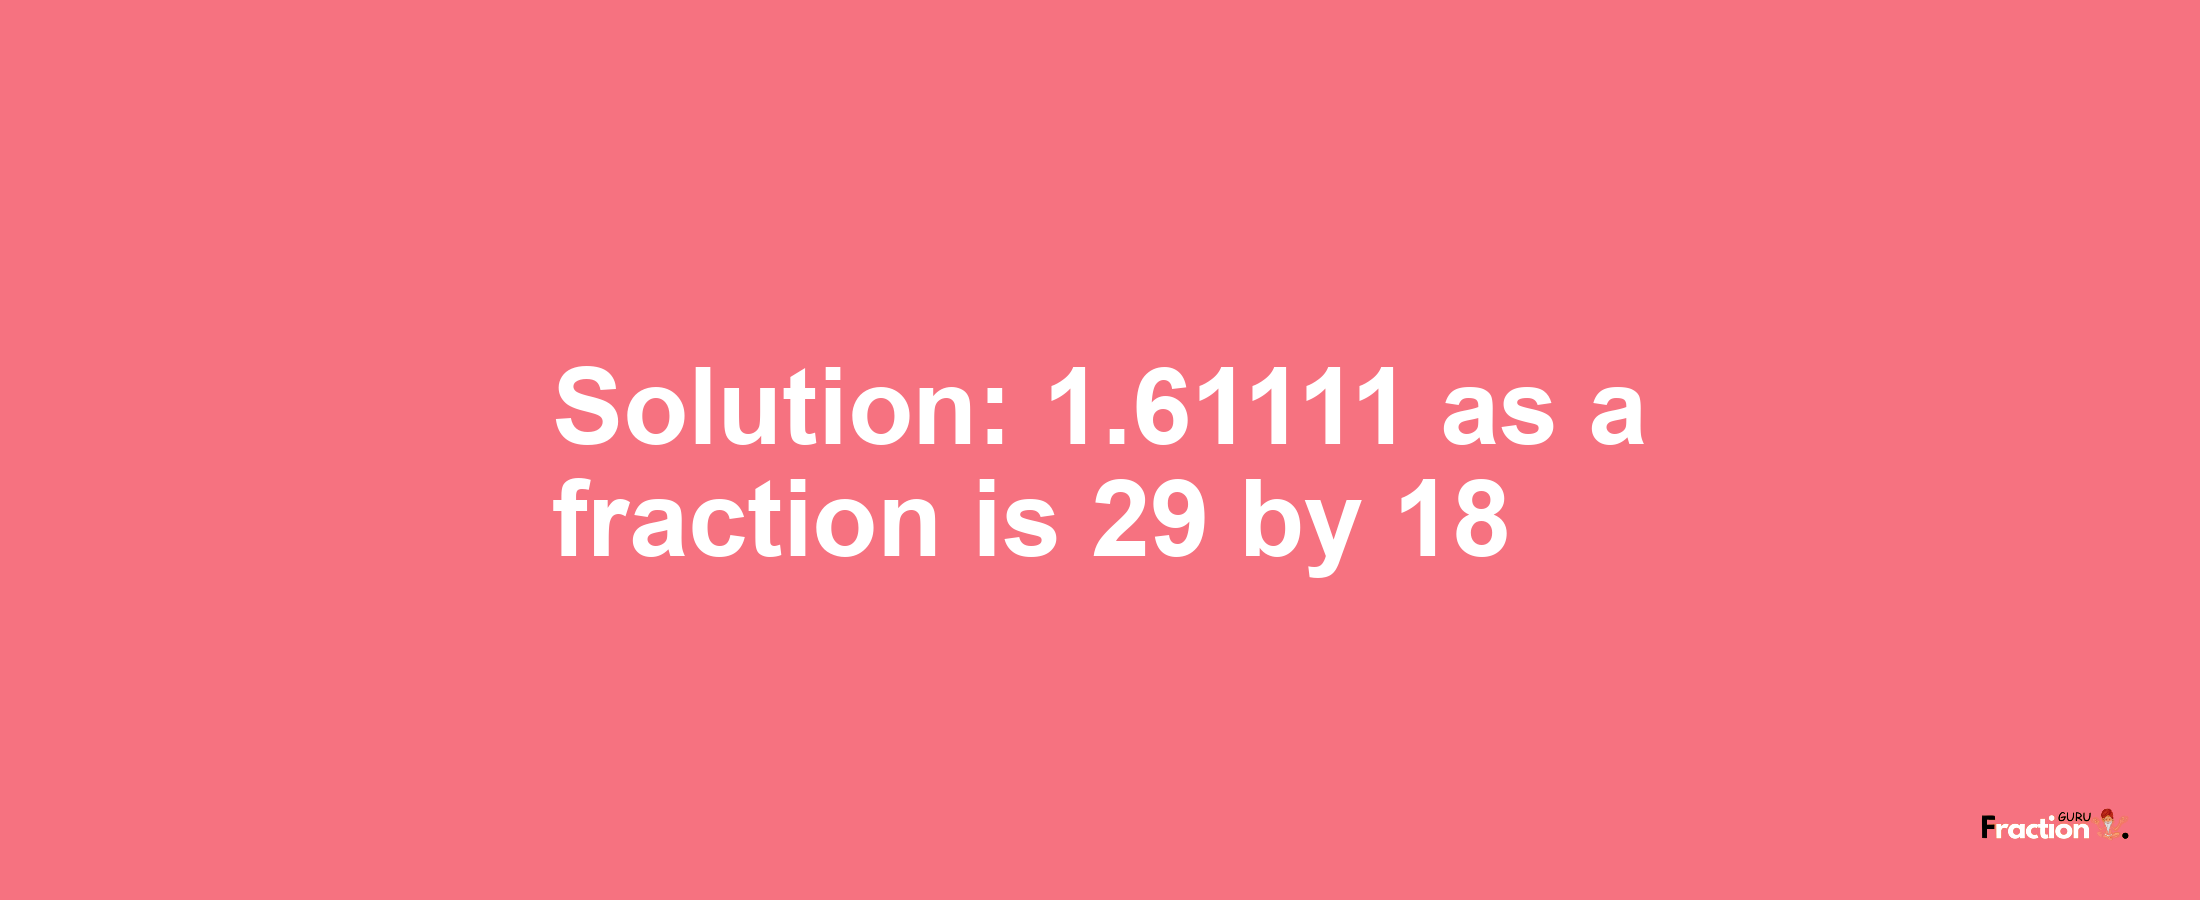 Solution:1.61111 as a fraction is 29/18